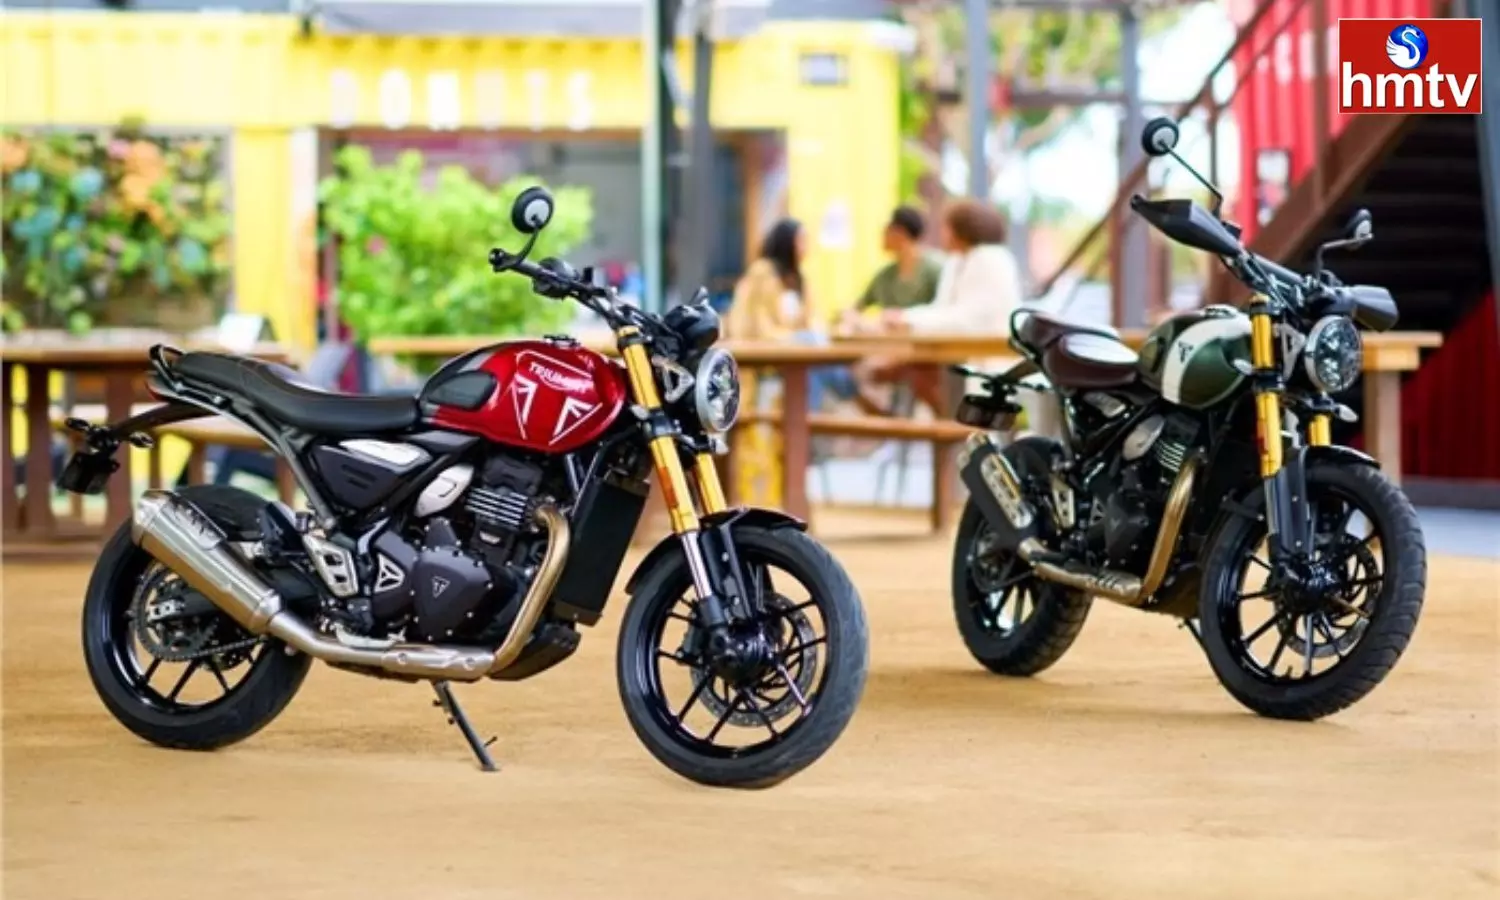 Triumph Scrambler 400 x Launch at RS 2.63 Lakh Check Here Features and Speifications